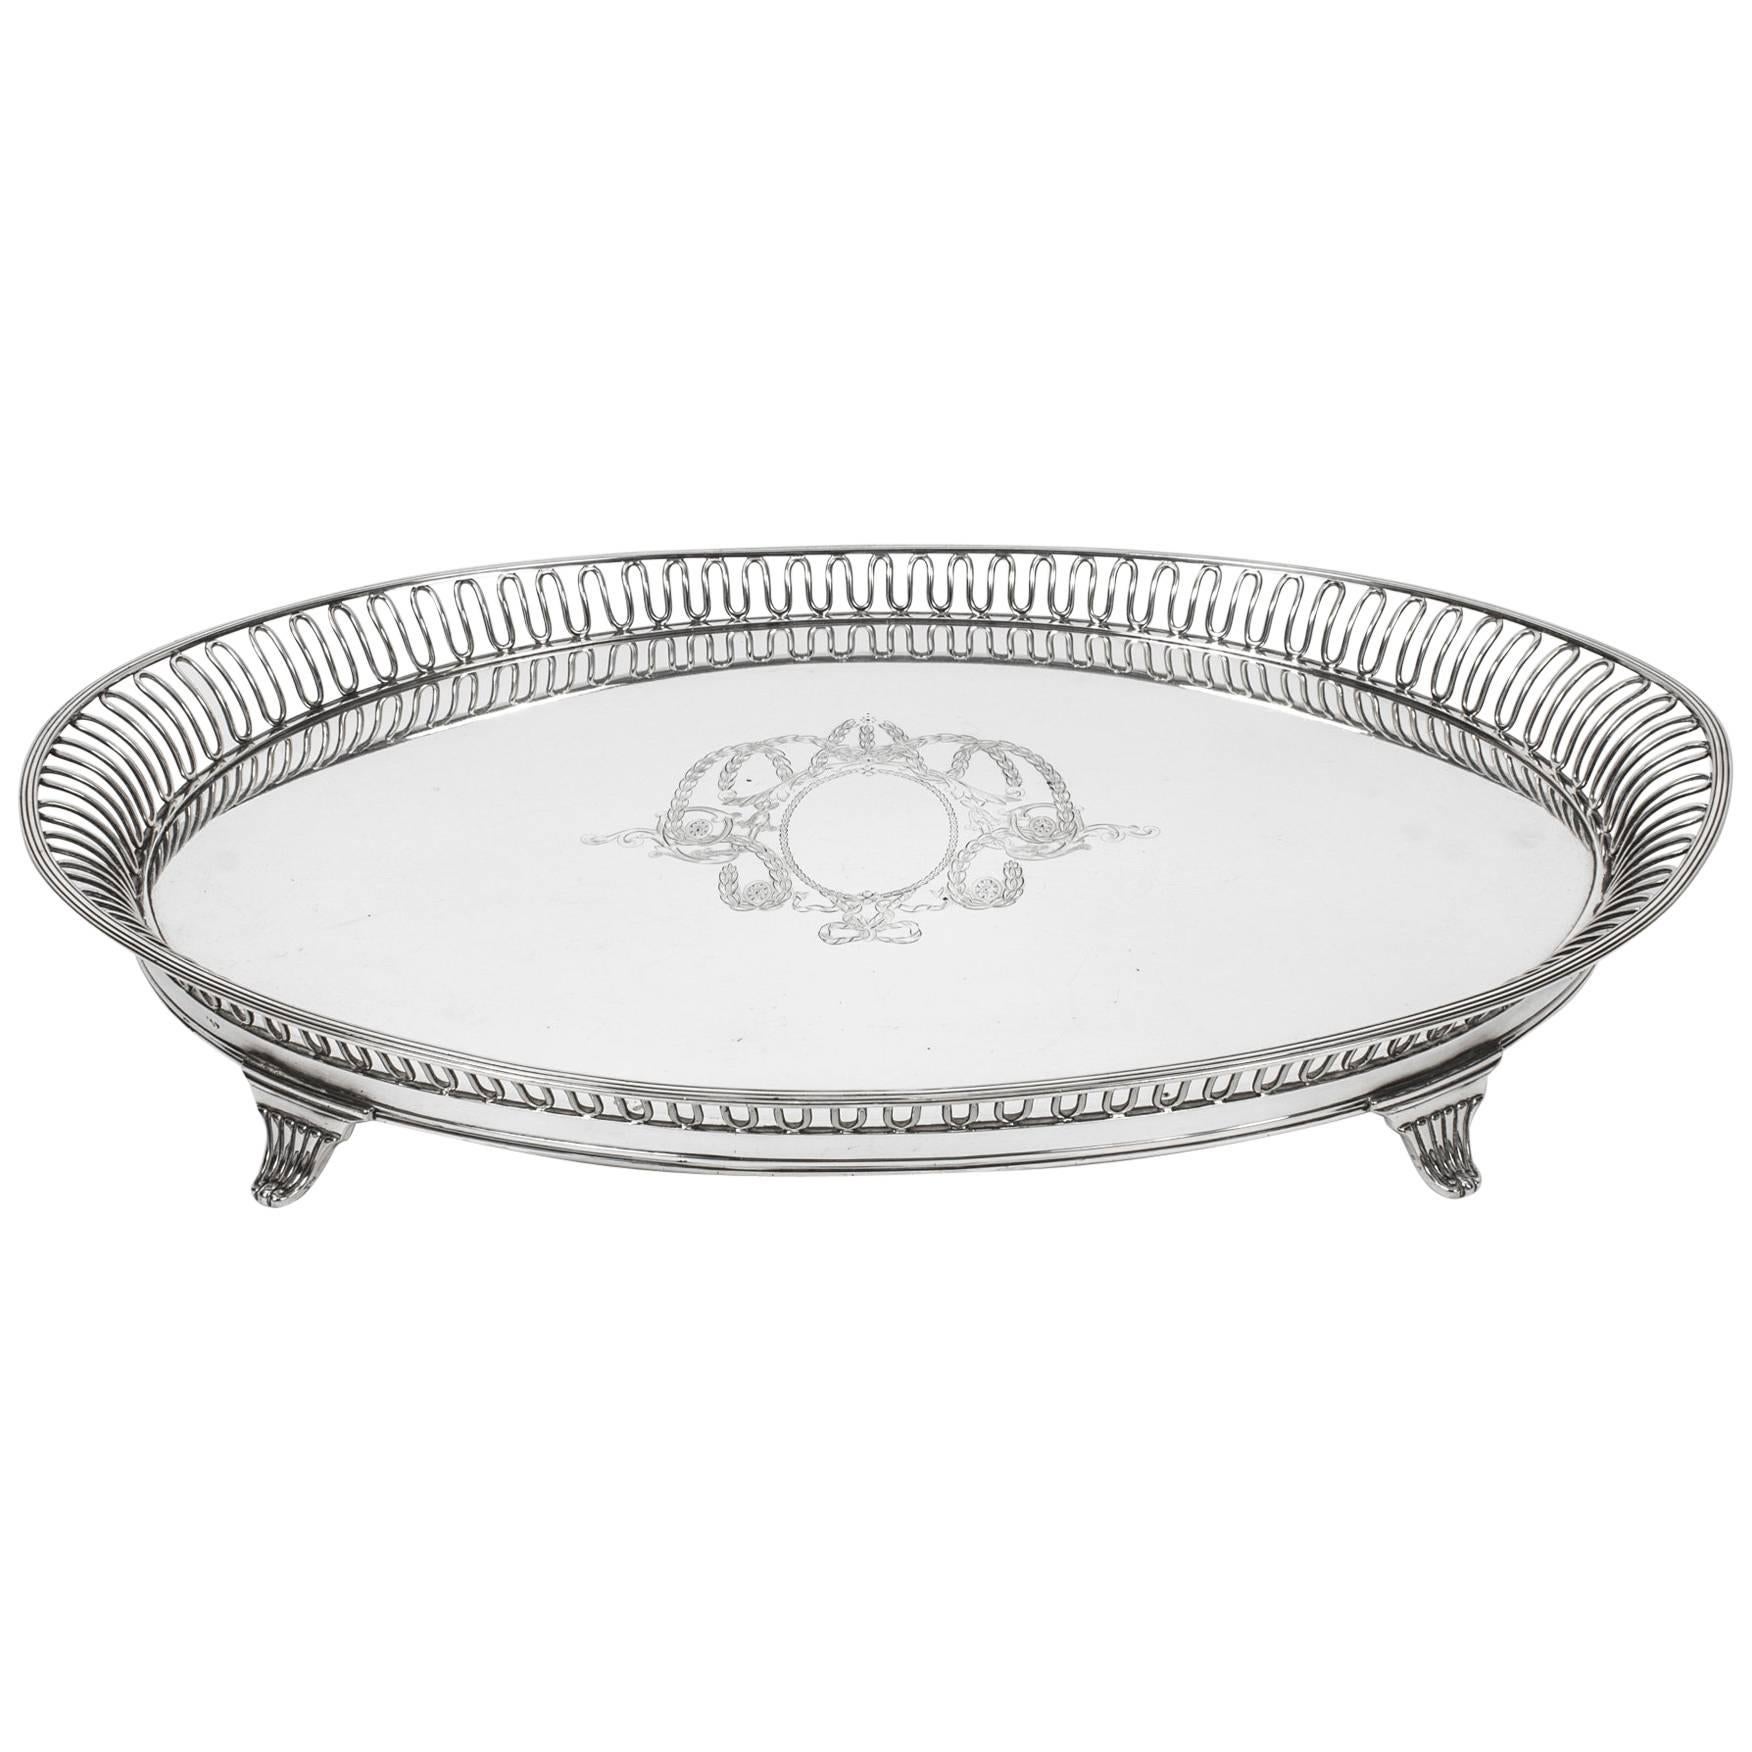 19th Century Victorian Oval Silver Plated Tray by Elkington